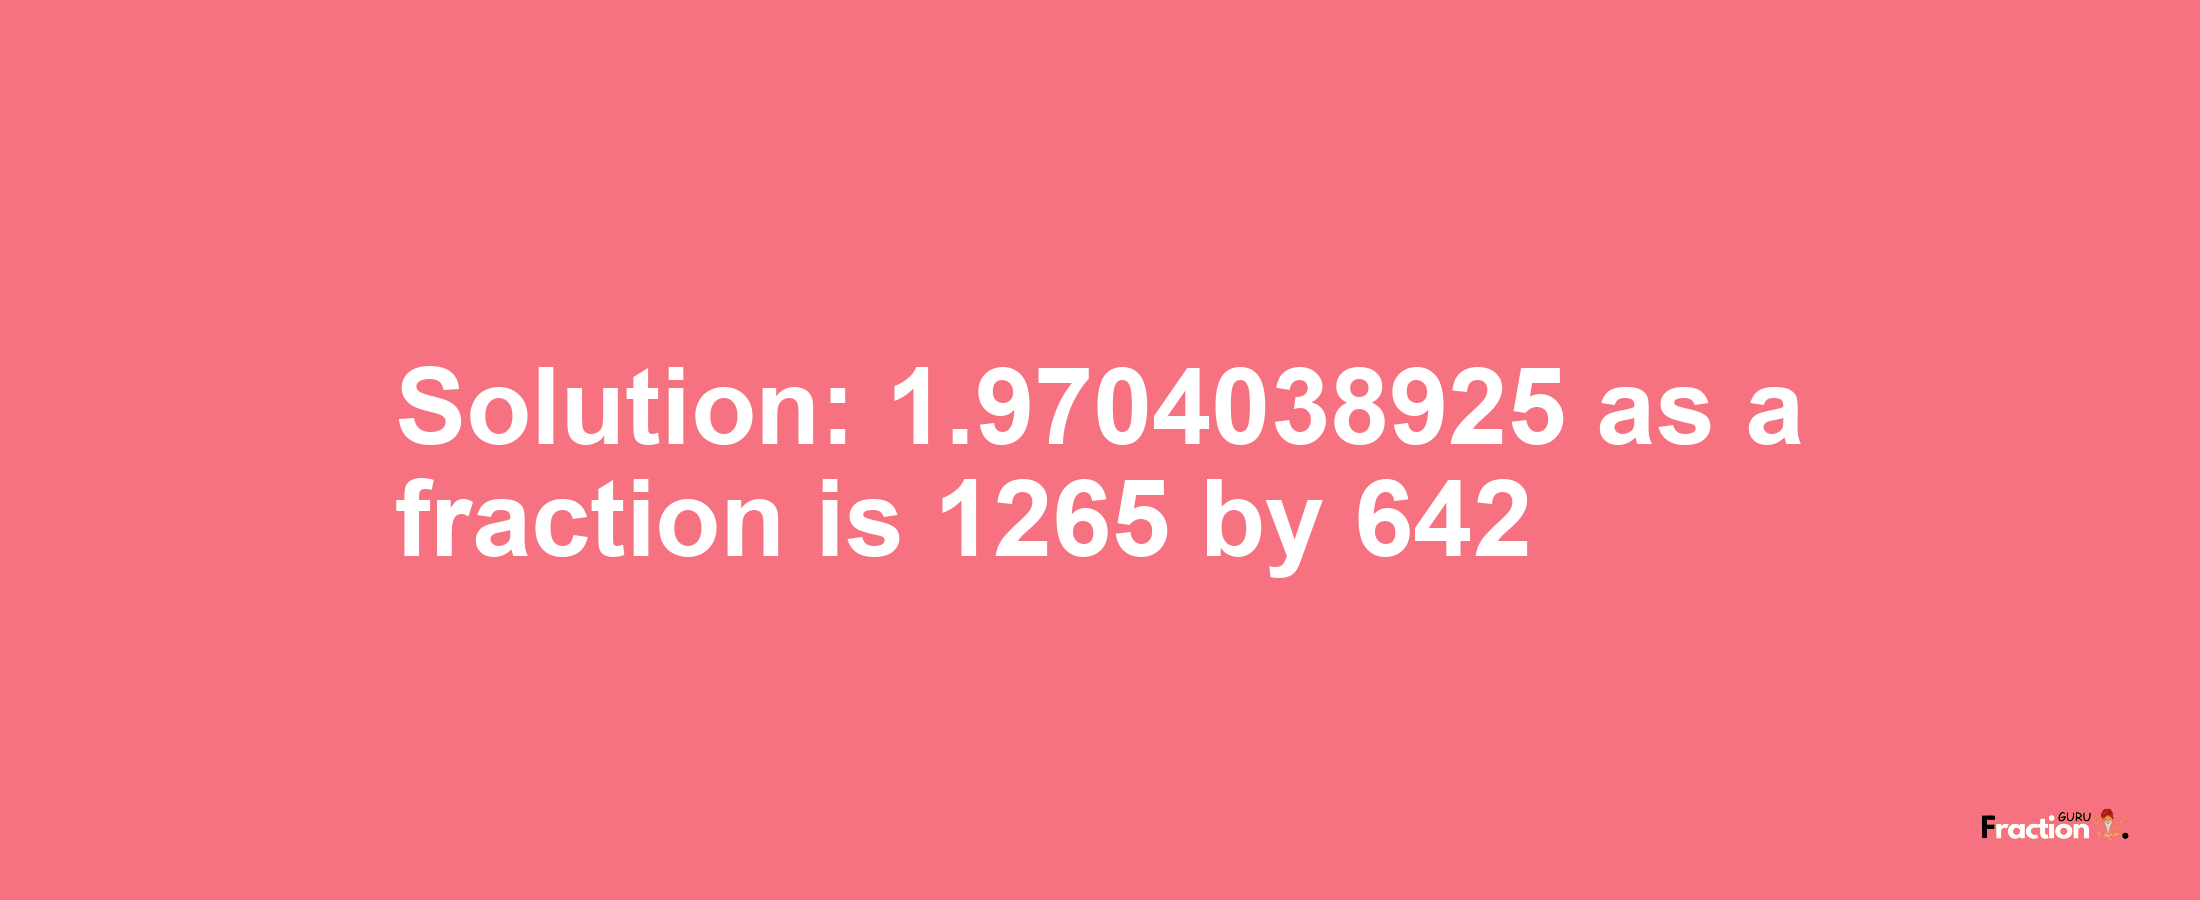 Solution:1.9704038925 as a fraction is 1265/642